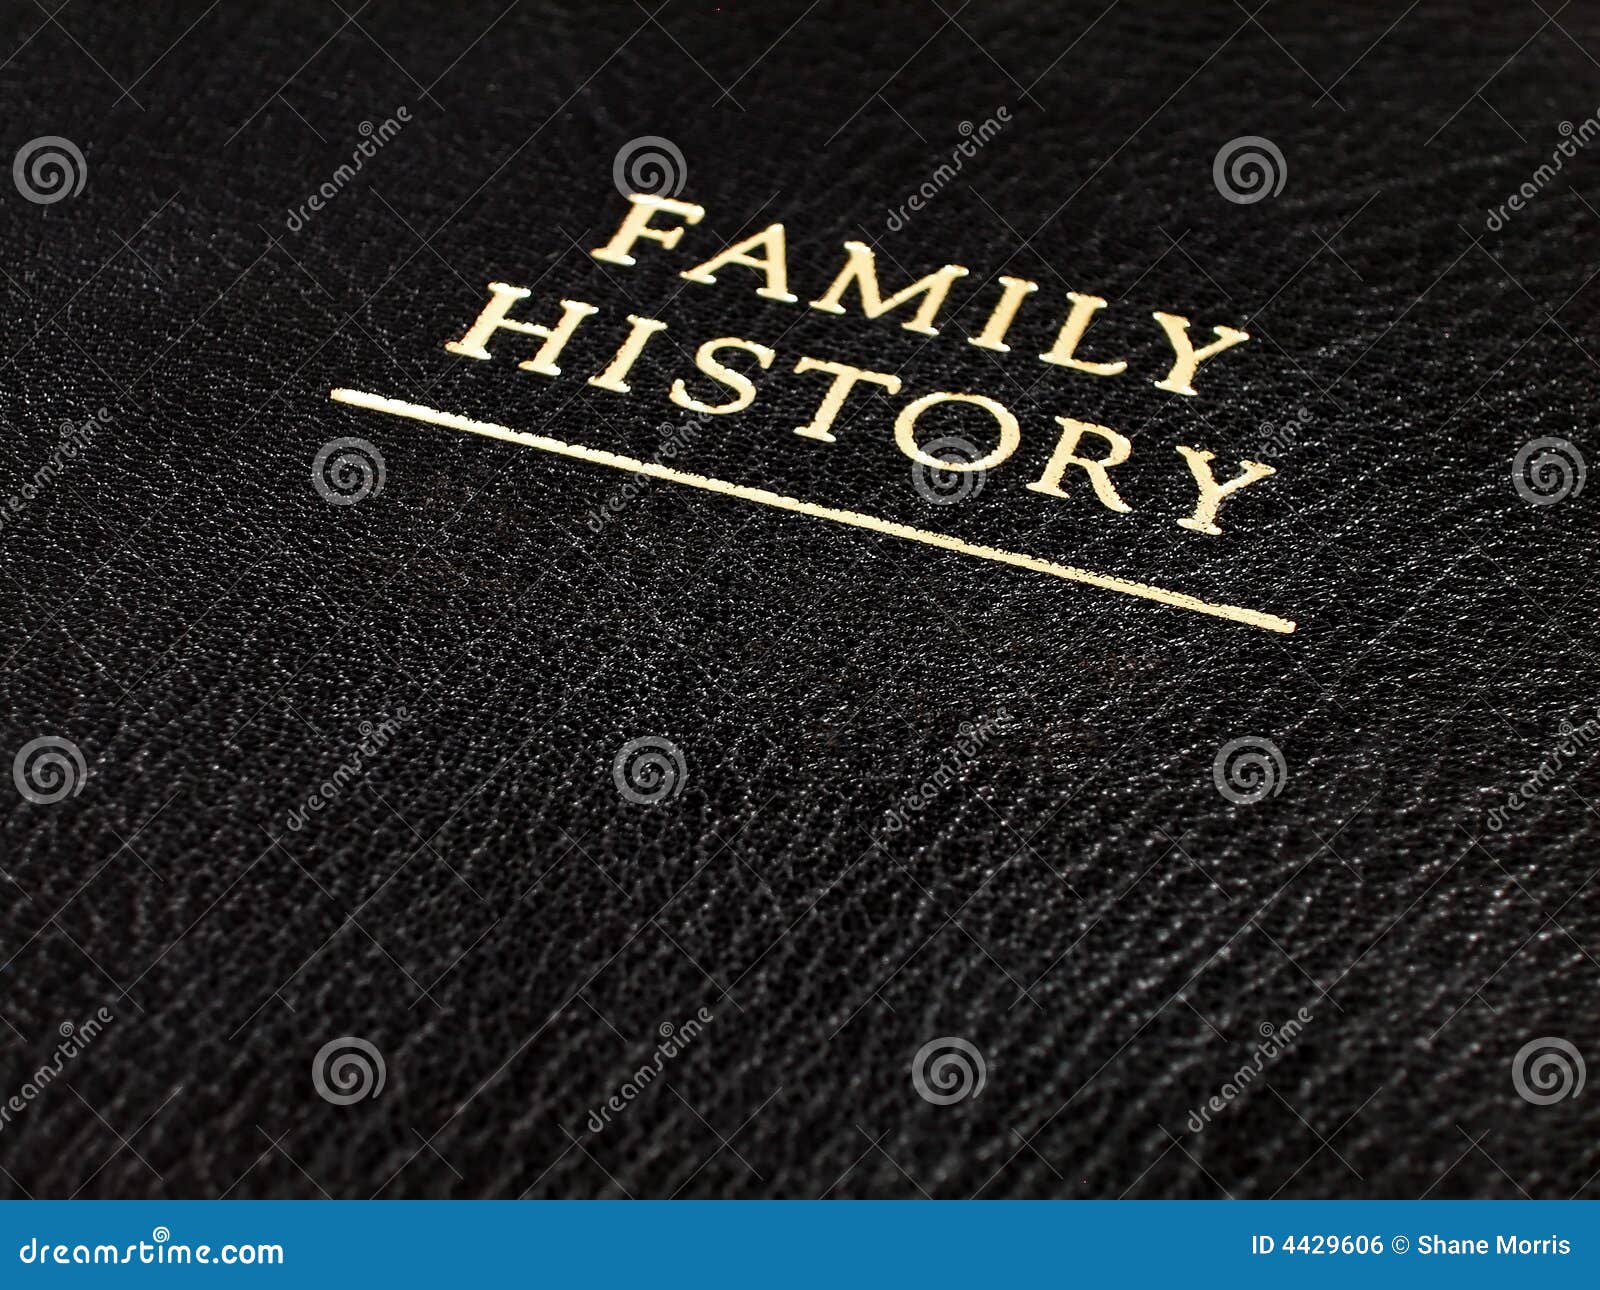 leather family history book